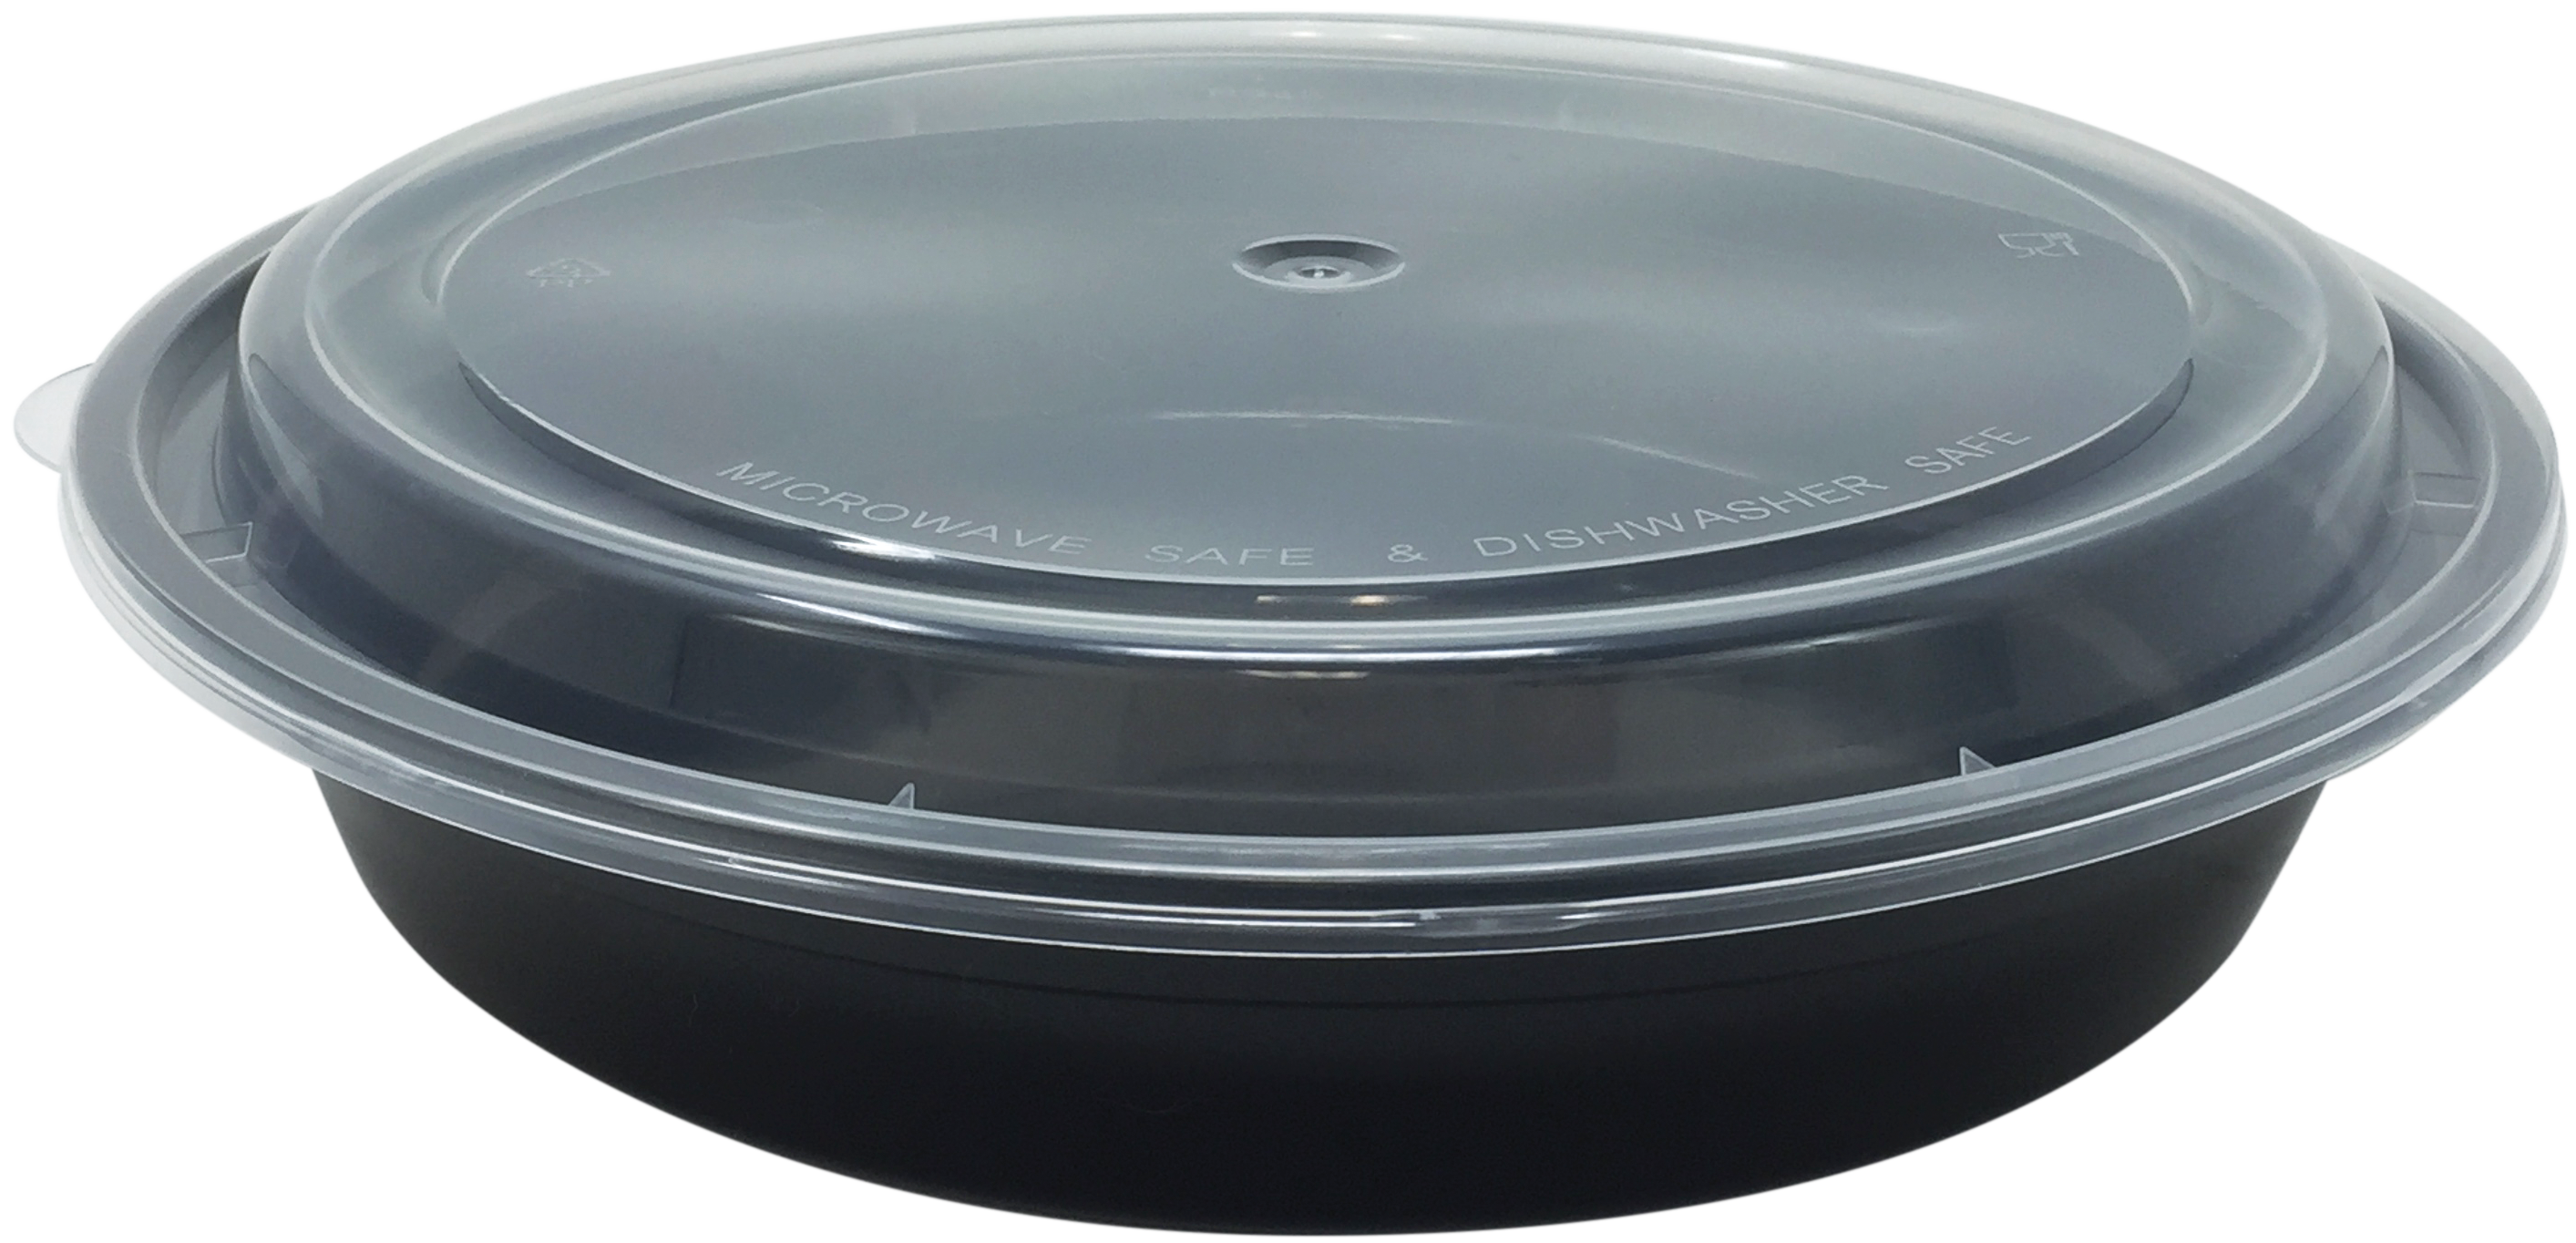 https://snappakusa.com/home/wp-content/uploads/2021/06/12112_New_48oz_Round_3Qrt_Empty-Container_With_Lid.png